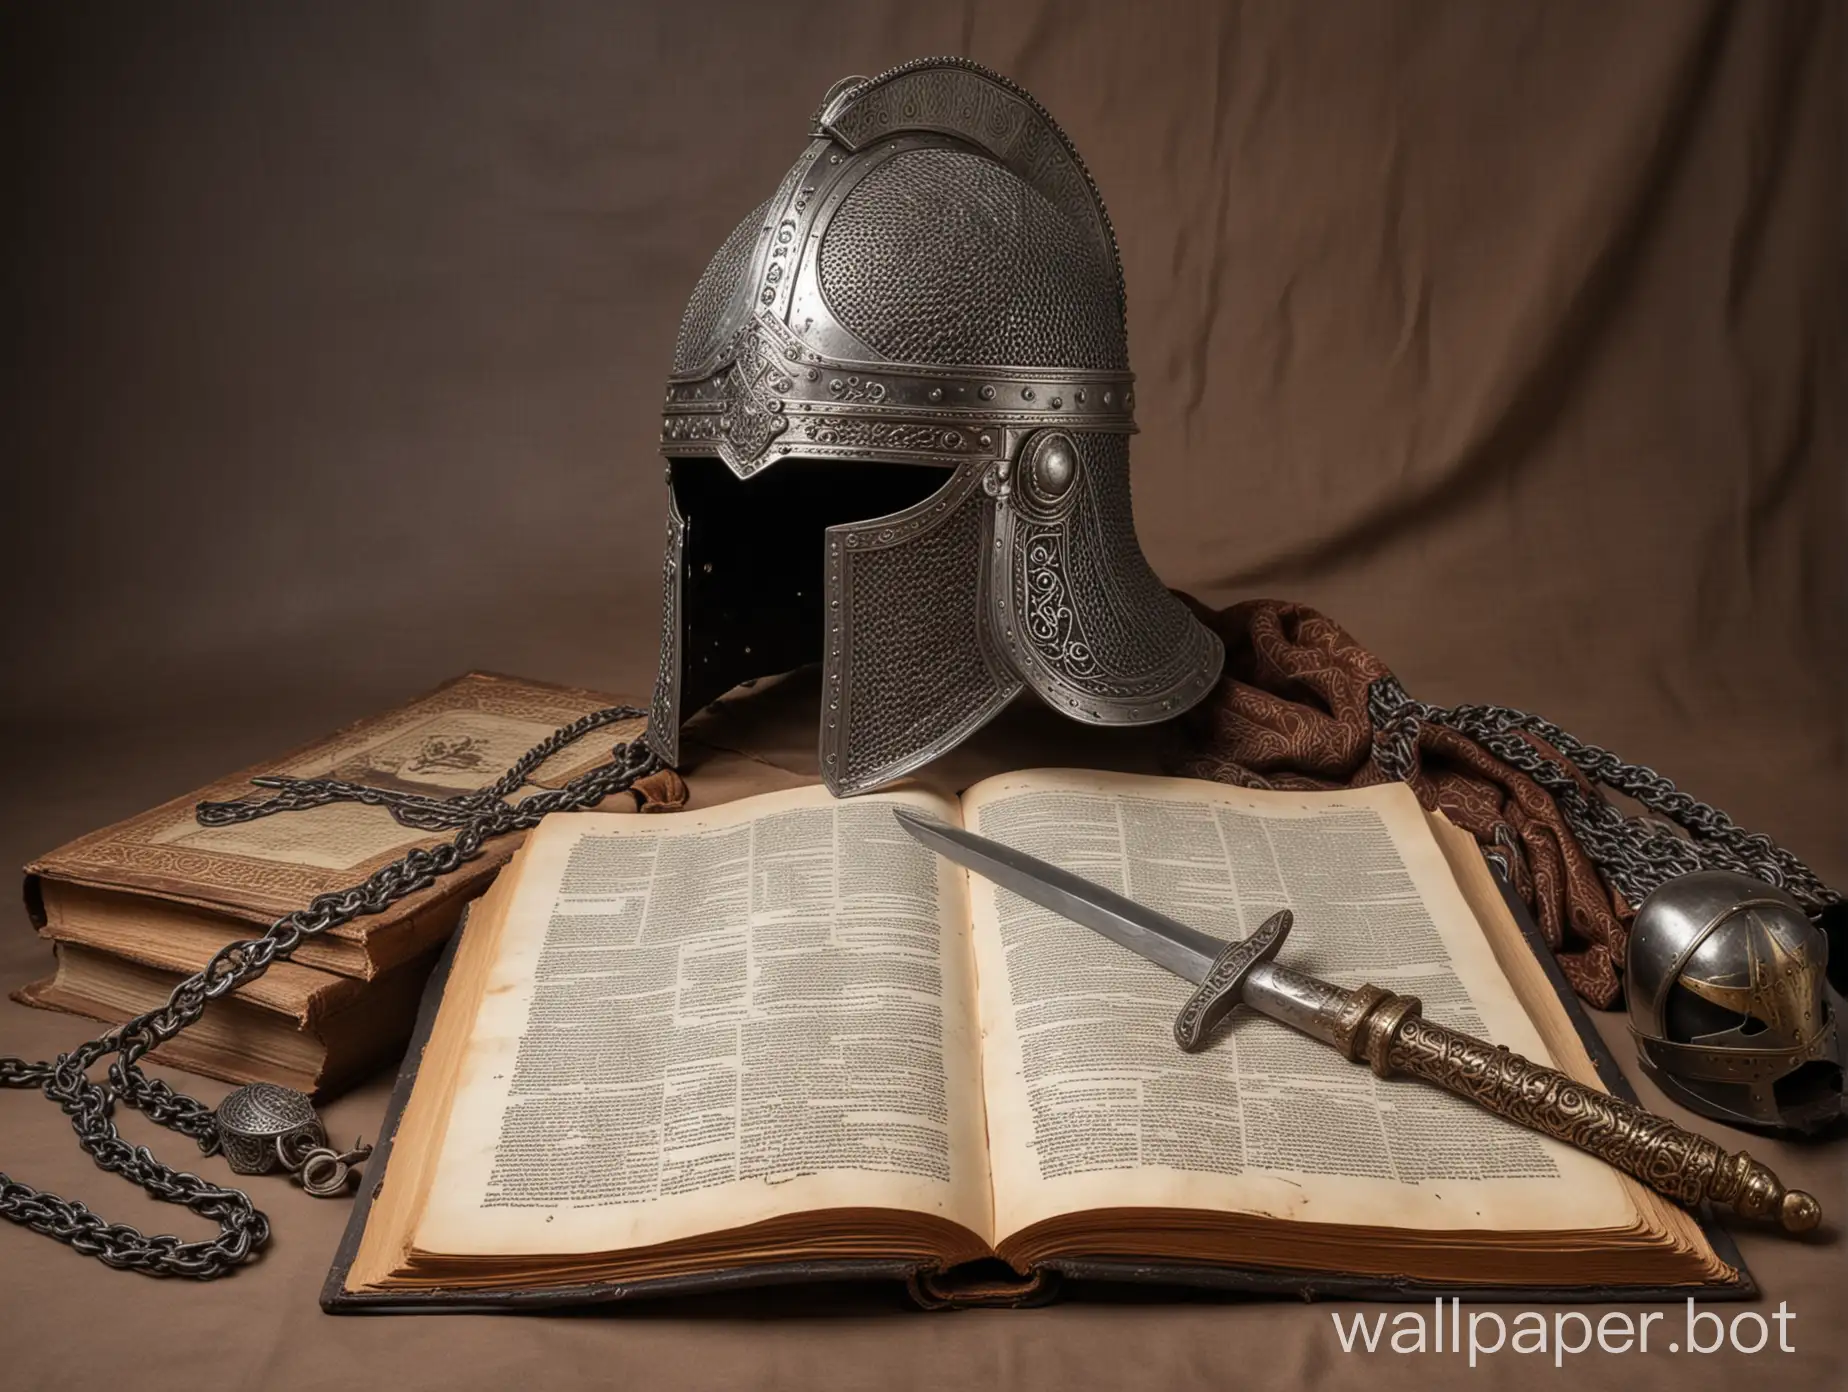 Large ancient Russian helmet, sword, chainmail, shield, old open book